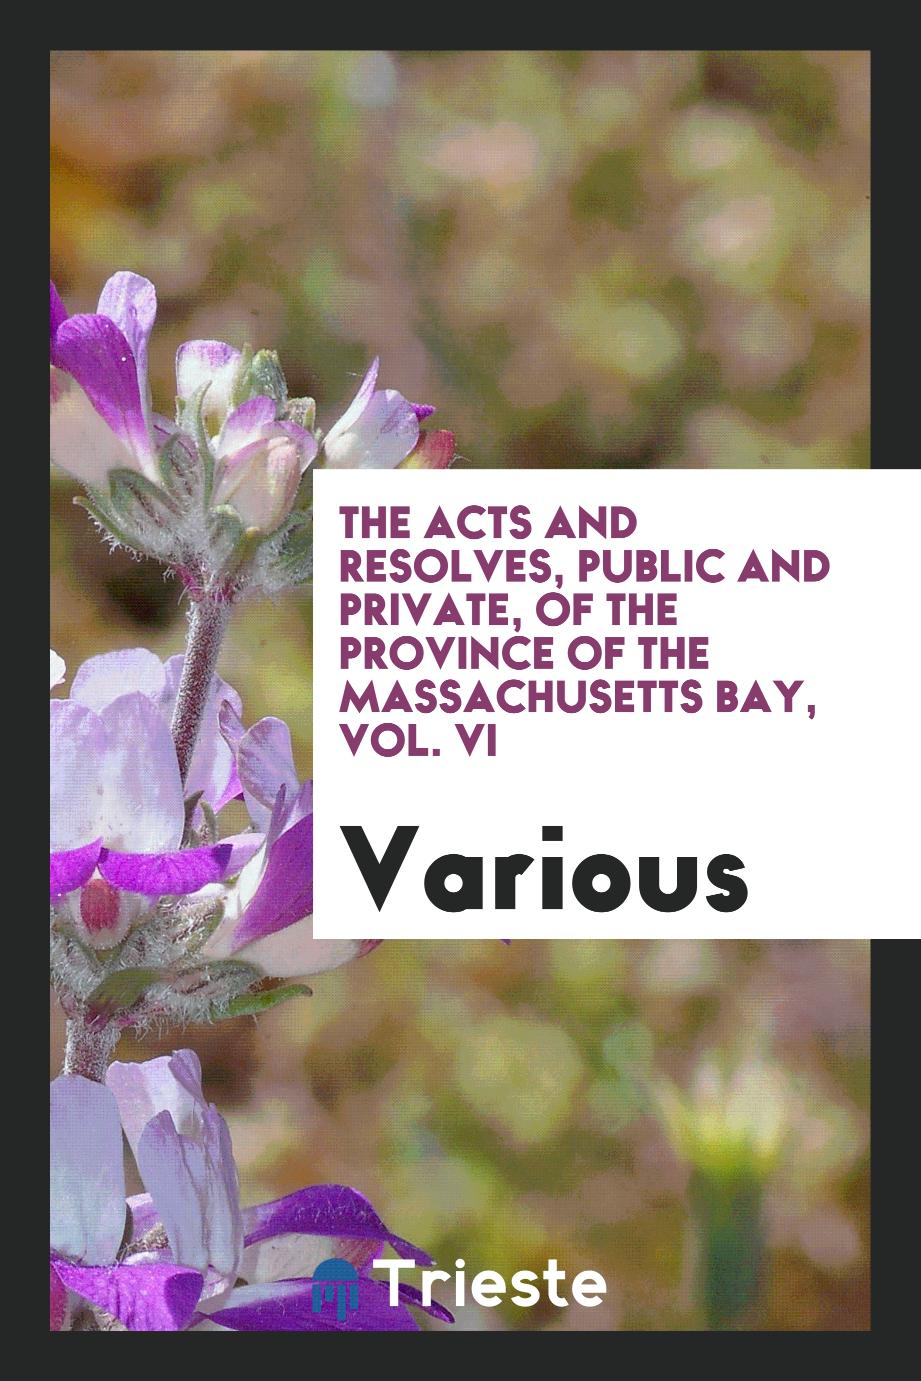 The Acts and Resolves, Public and Private, of the Province of the Massachusetts Bay, Vol. VI